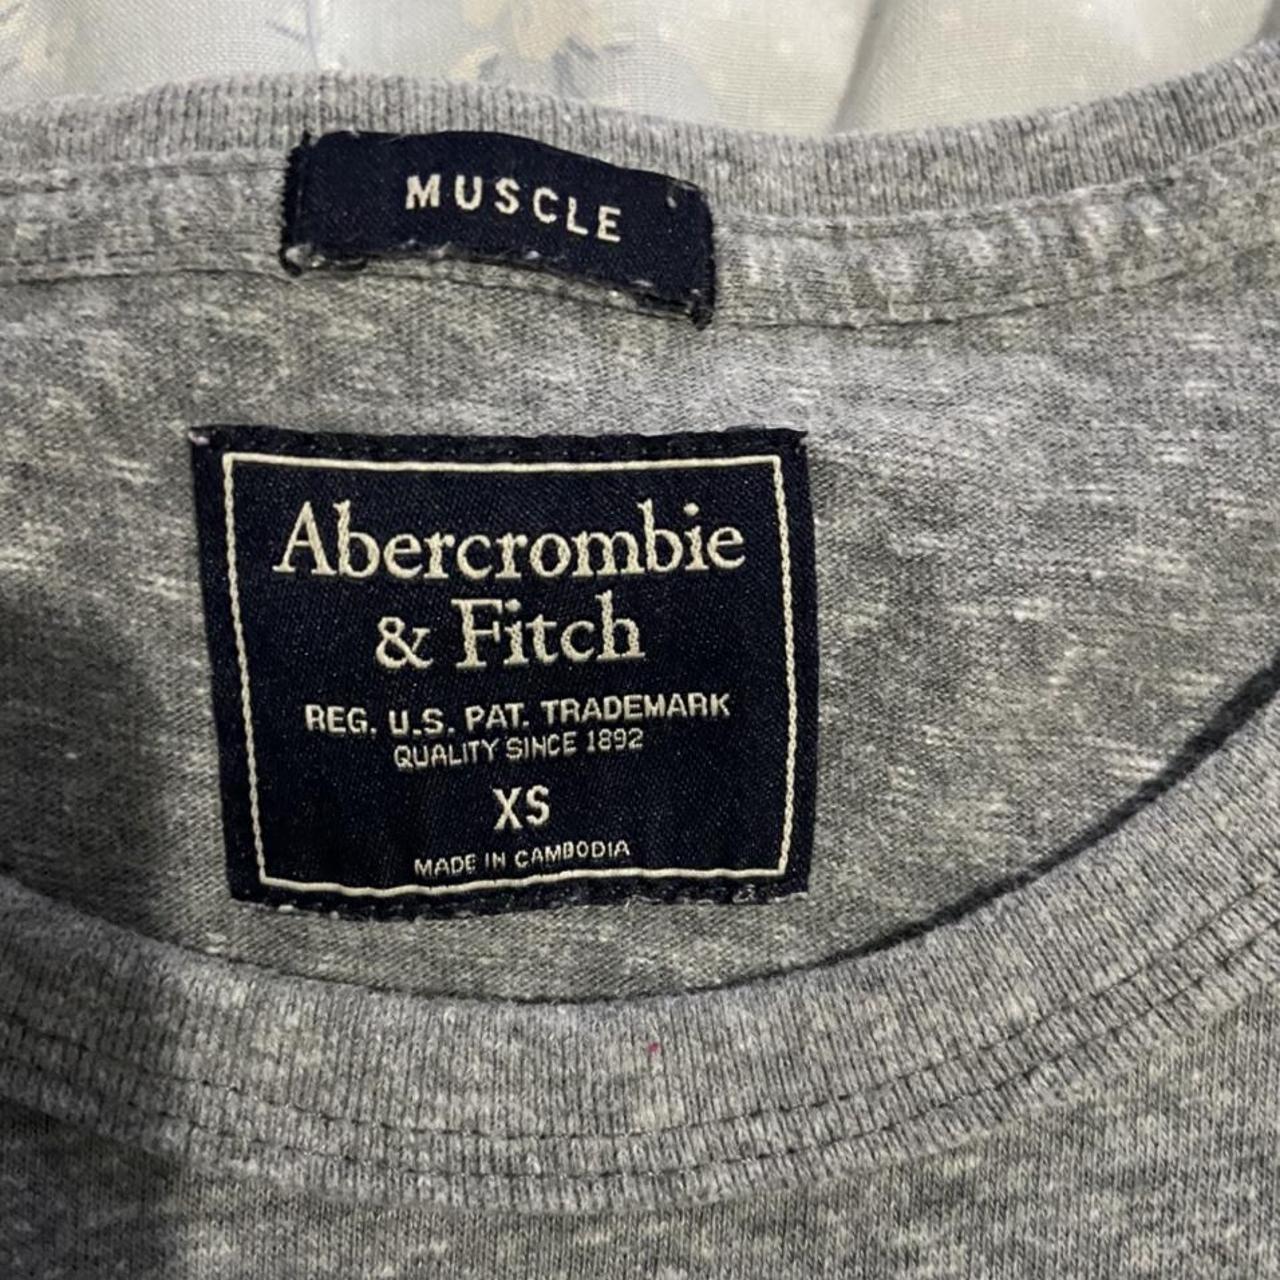 Abercrombie & Fitch Women's Grey and White T-shirt | Depop